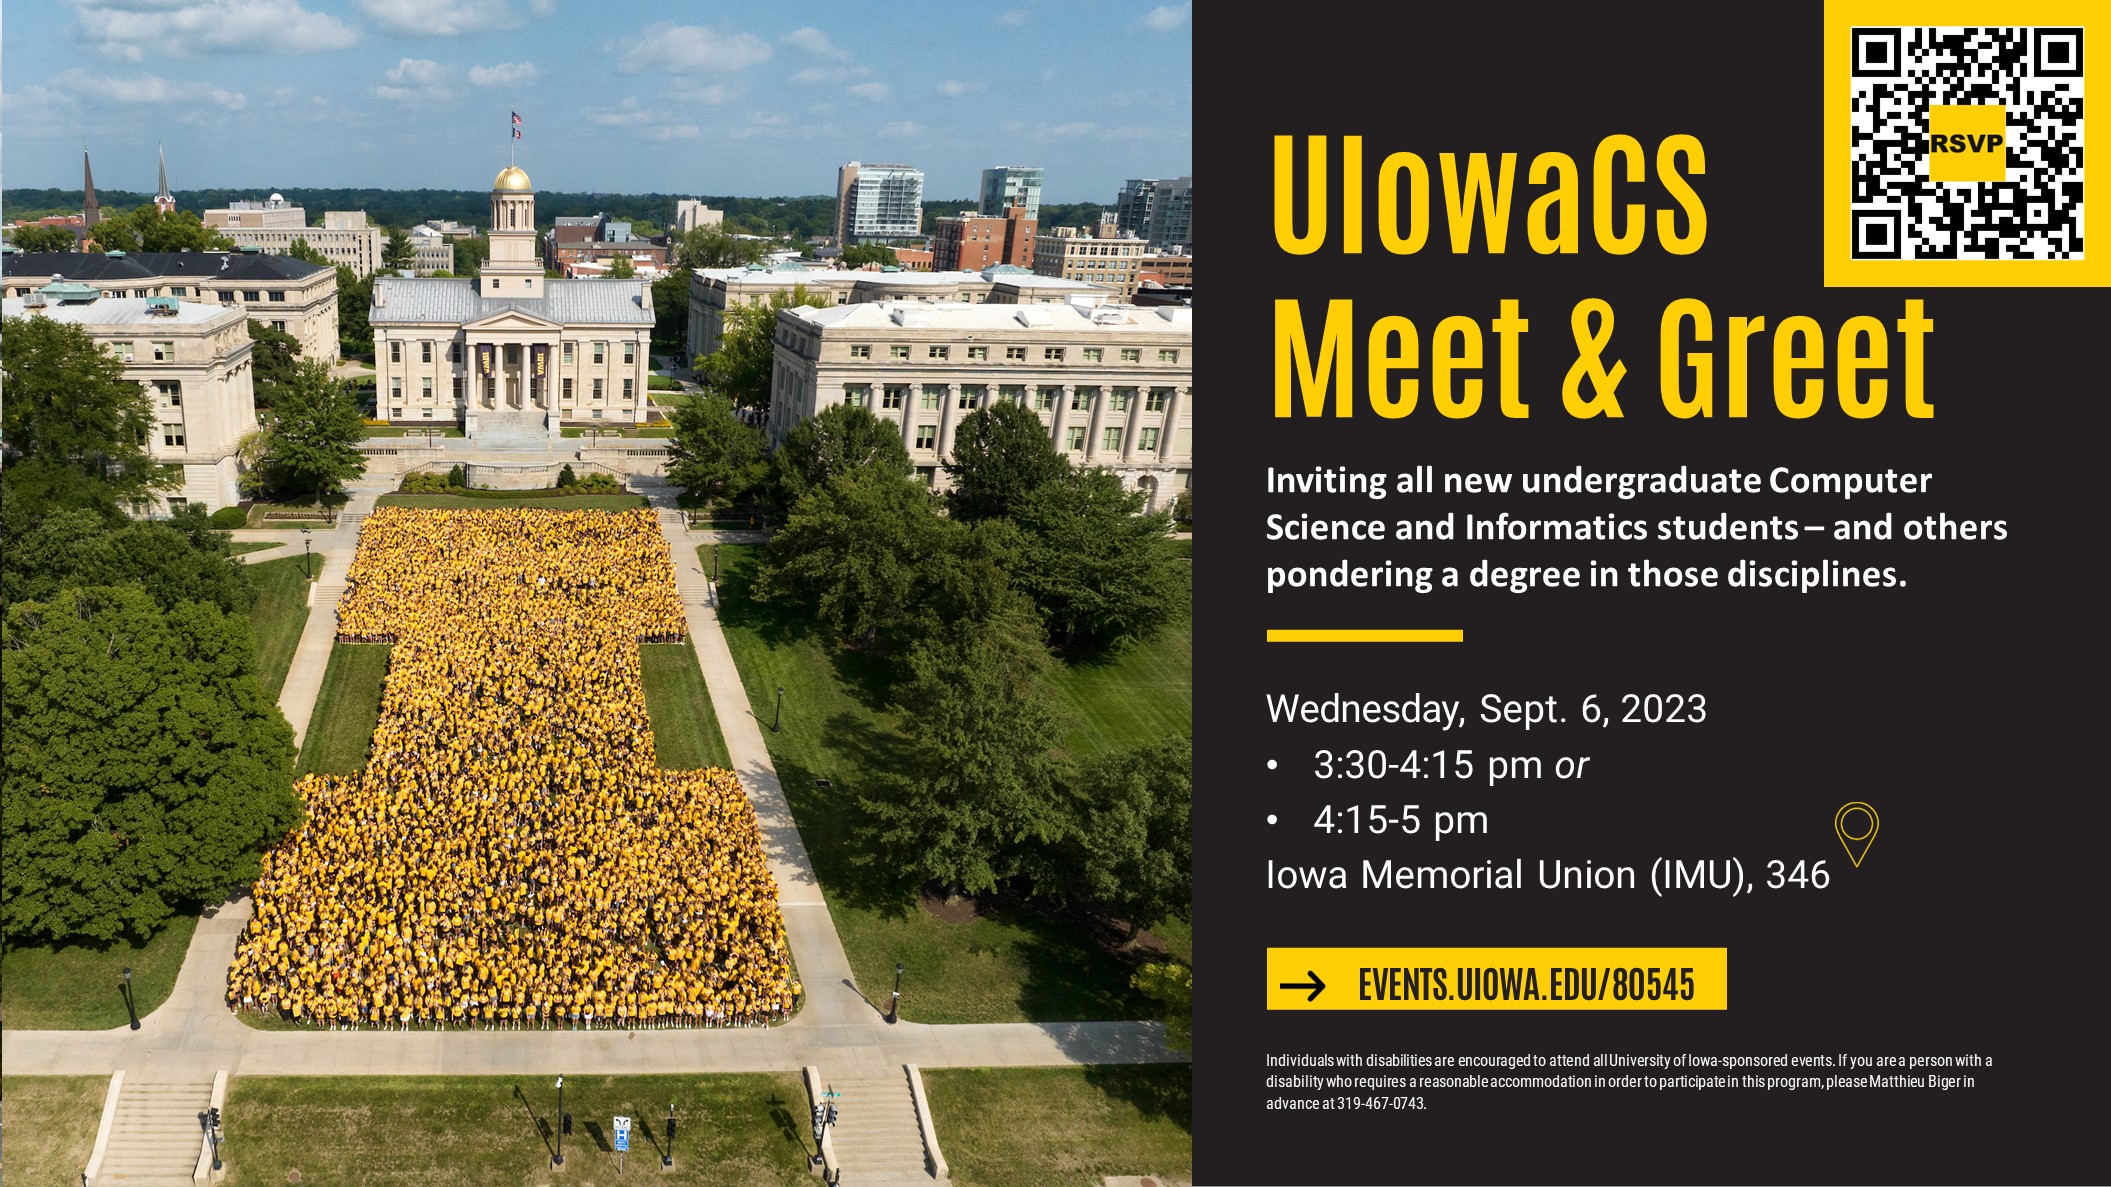 UIowaCS Meet & Greet; Inviting all new undergraduate Computer Science and Informatics students – and others pondering a degree in those disciplines. Wednesday, Sept. 6, 2023   3:30-4:15 pm or 4:15-5 pm Iowa Memorial Union (IMU), 346 - with Fall 2022 IOWA